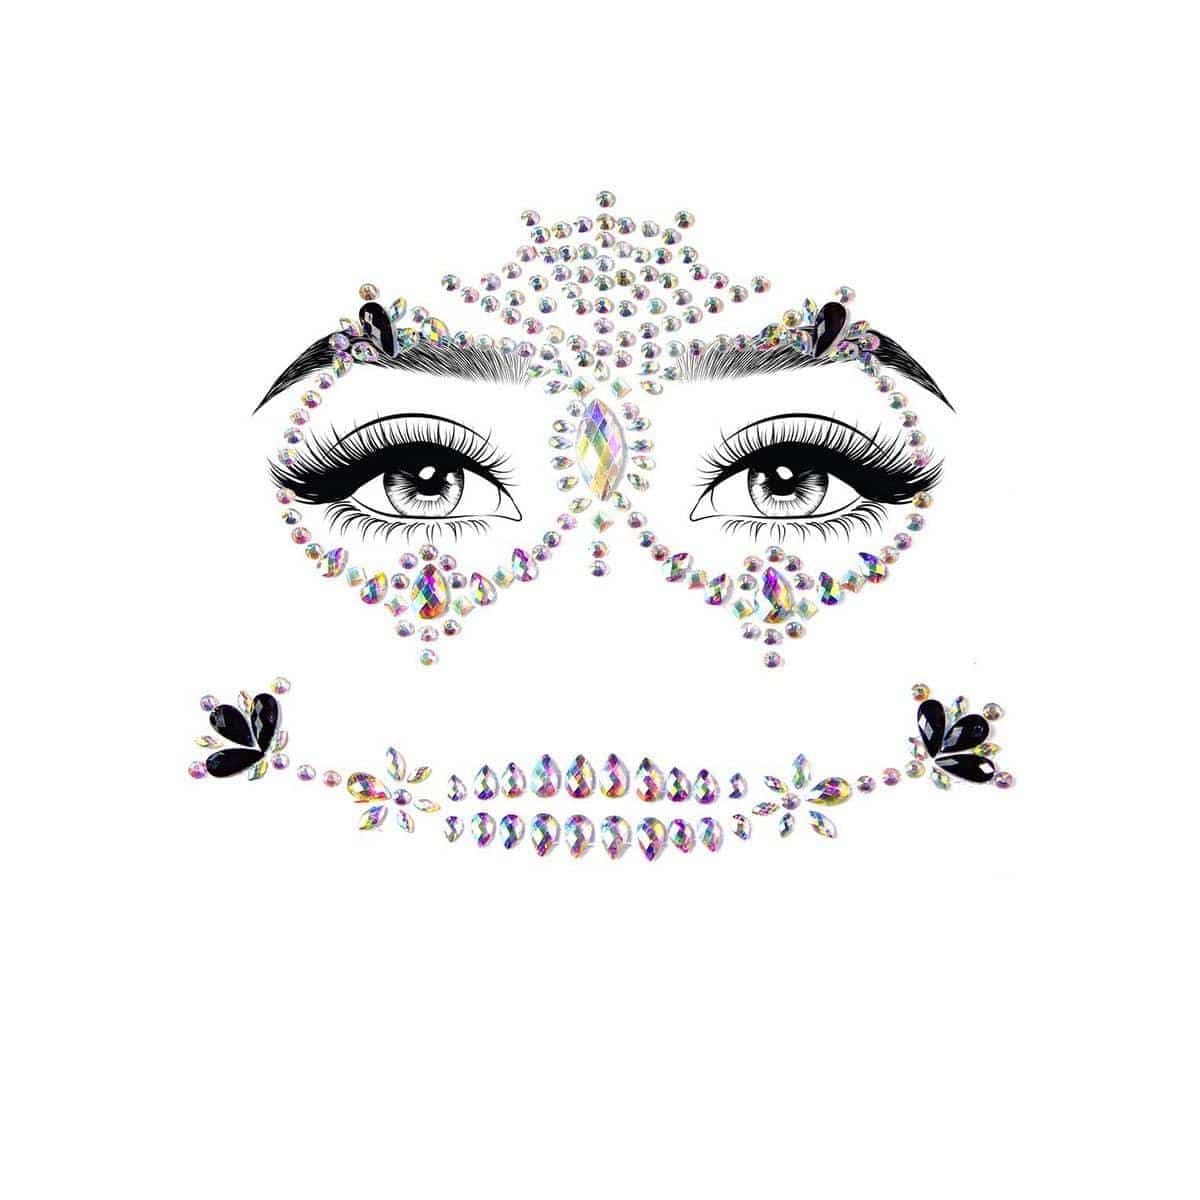 Buy Costume Accessories Calavera Adhesive Face Jewels sold at Party Expert